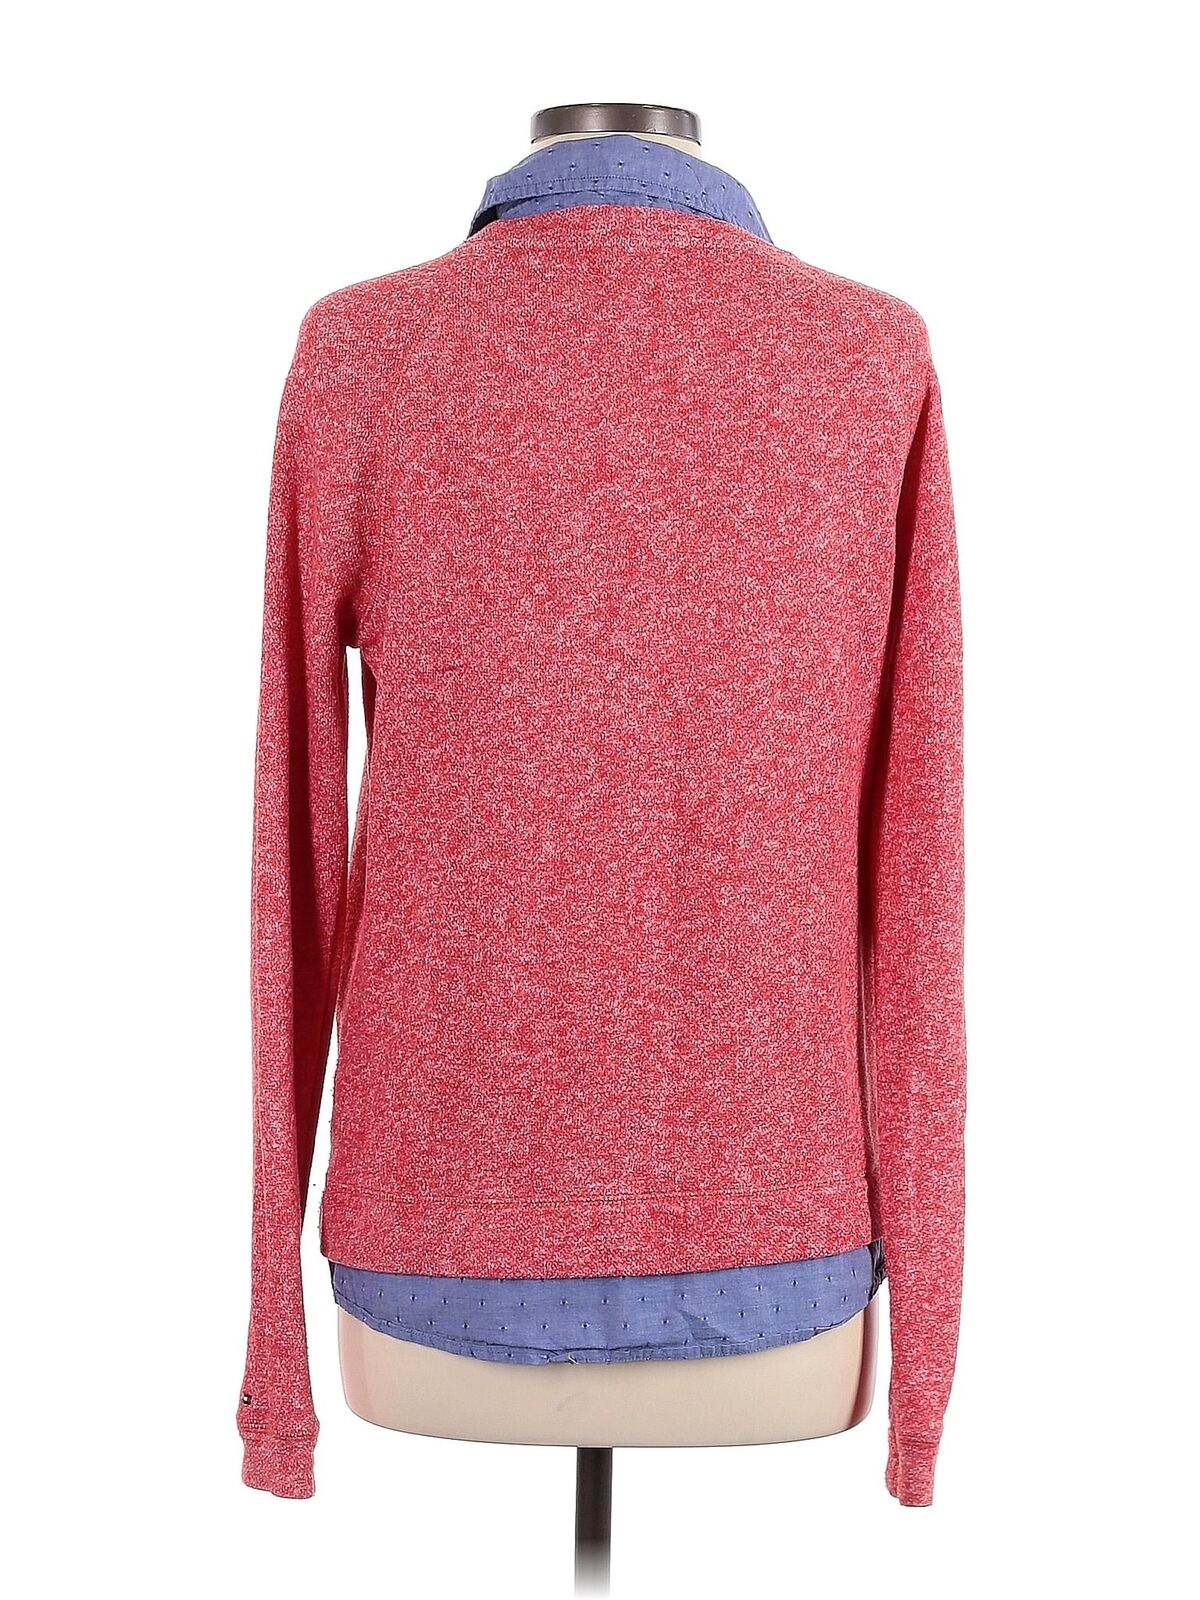 Tommy Hilfiger Women Red Pullover Sweater M - image 2